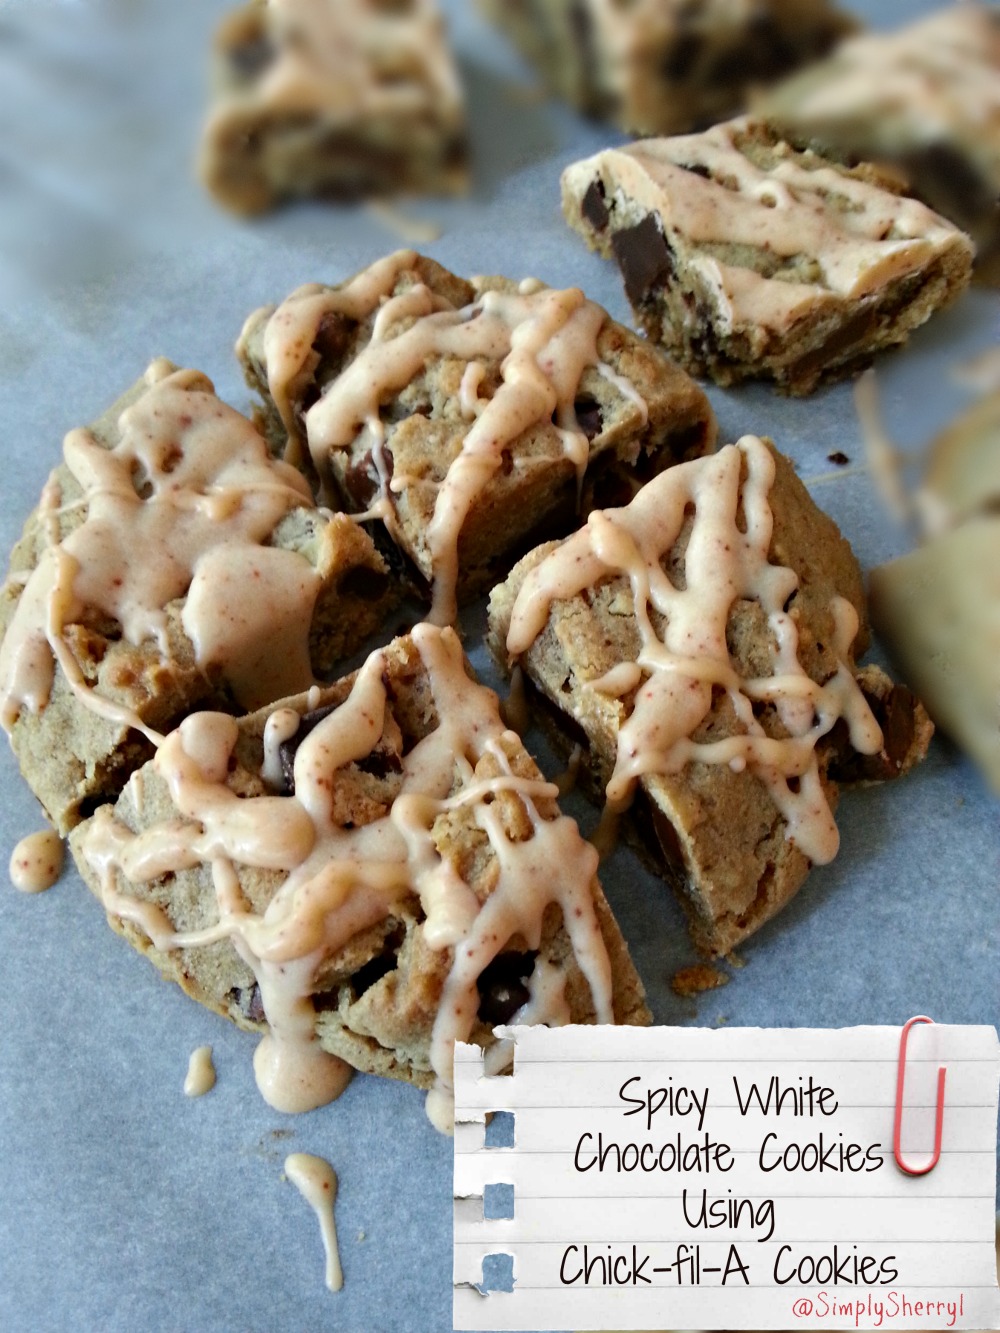 Spicy White Chocolate Cookies Using Chick-fil-A Cookies